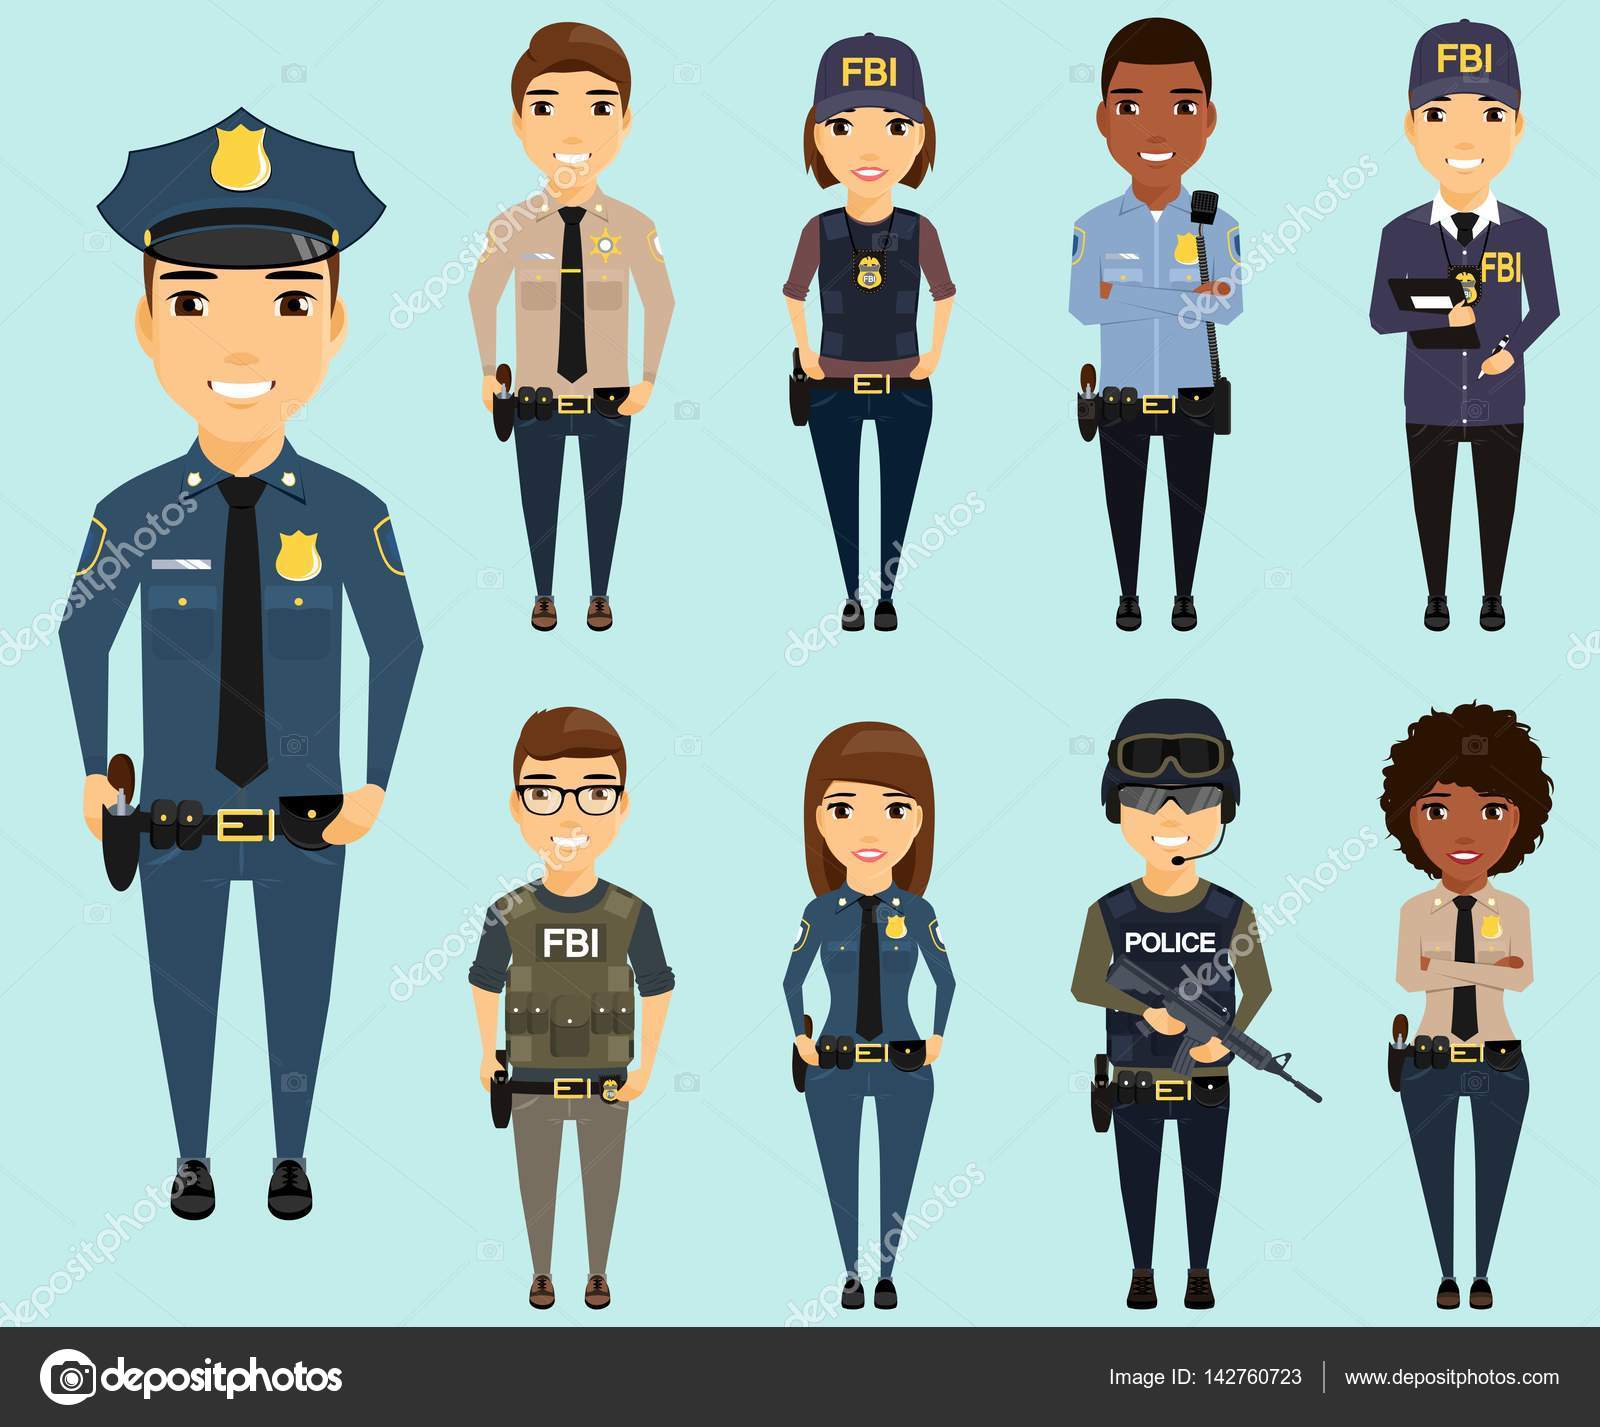 Male and female police officer in cartoon style Vector Image